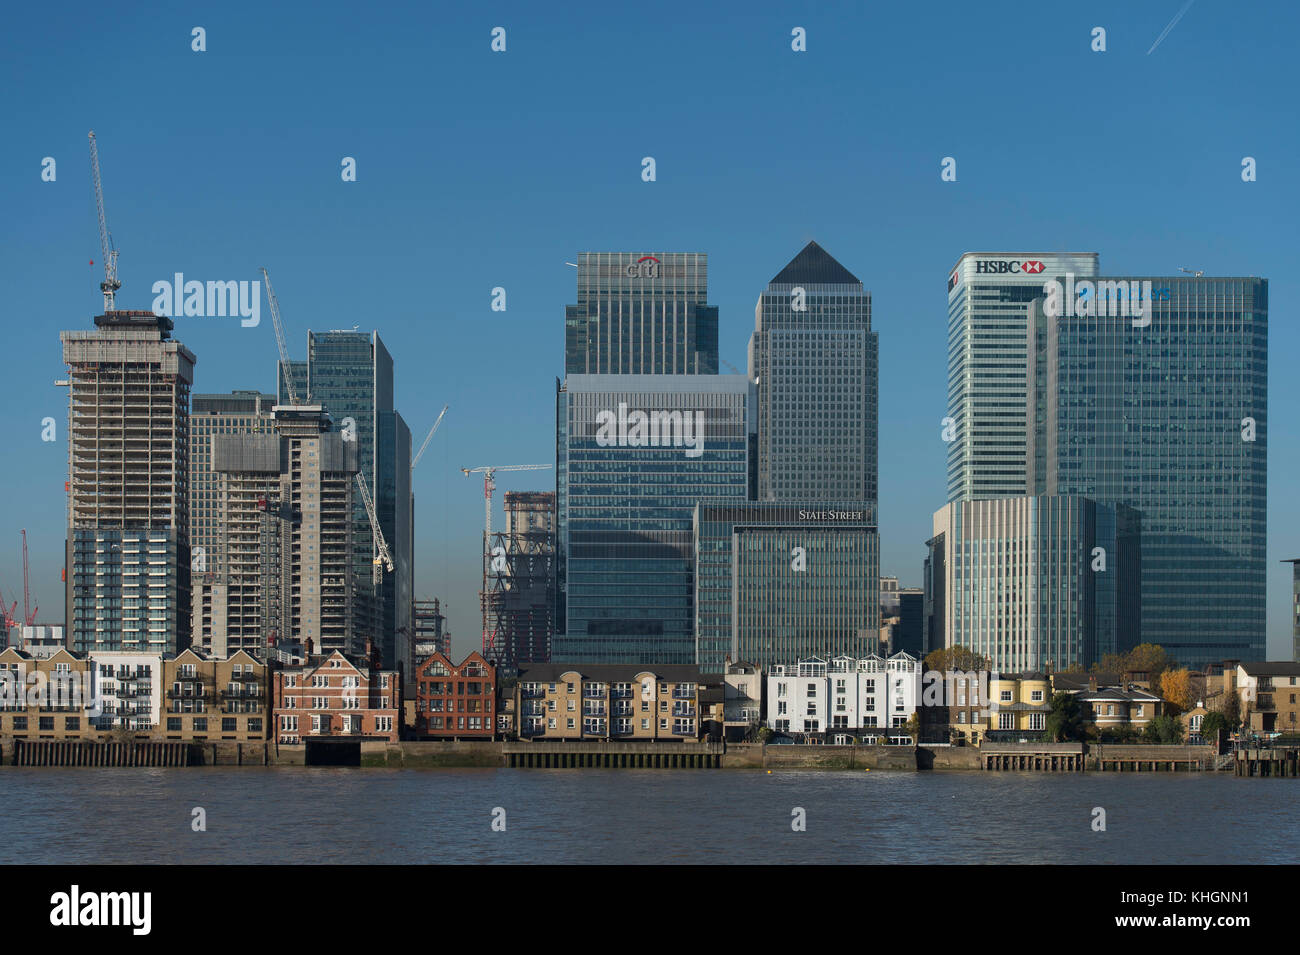 Canary Wharf, London, UK. 17 November, 2017. Crisp and clear winter morning in London’s docklands with Canary Wharf skyscrapers against blue sky. Credit: Malcolm Park/Alamy Live News. Stock Photo